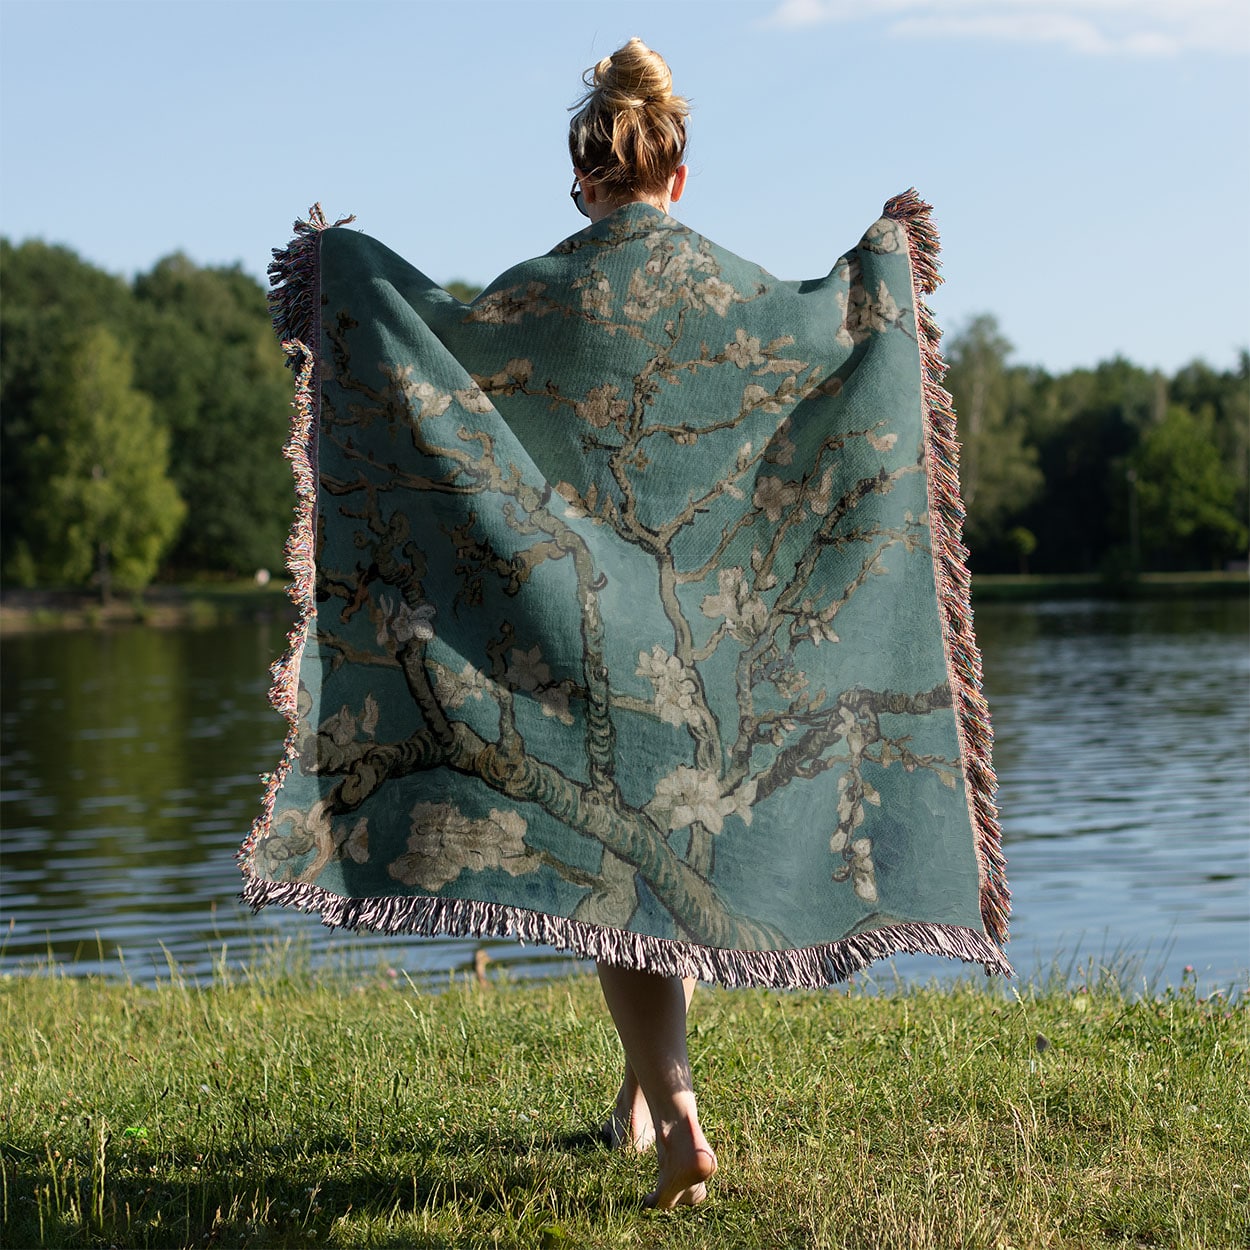 Spring Woven Blanket Held on a Woman's Back Outside